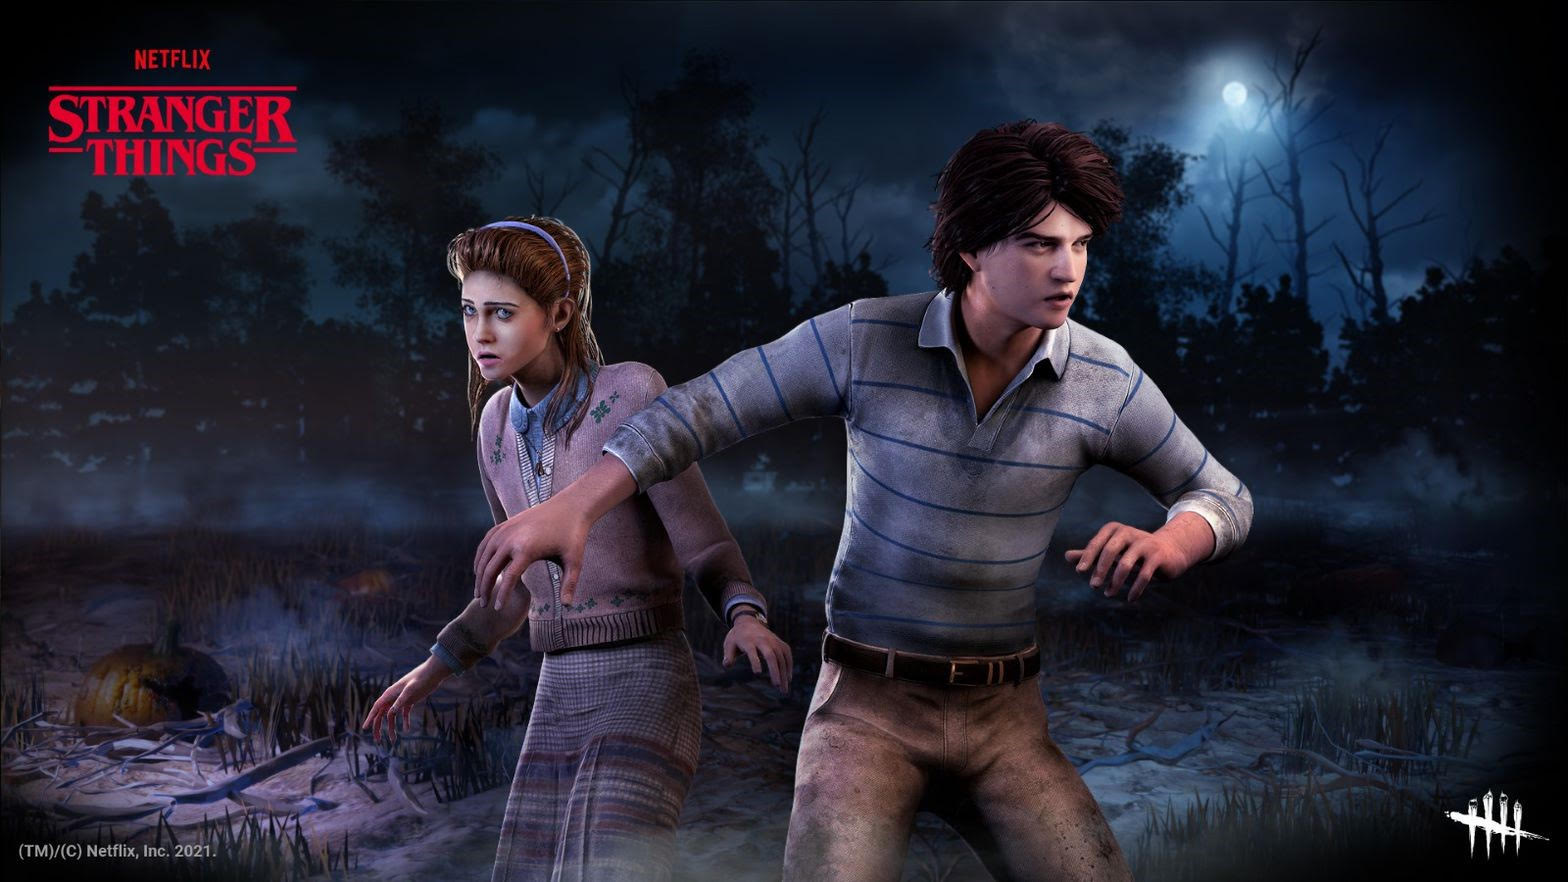 Dead by Daylight adds new outfits for Netflix's Stranger Things characters